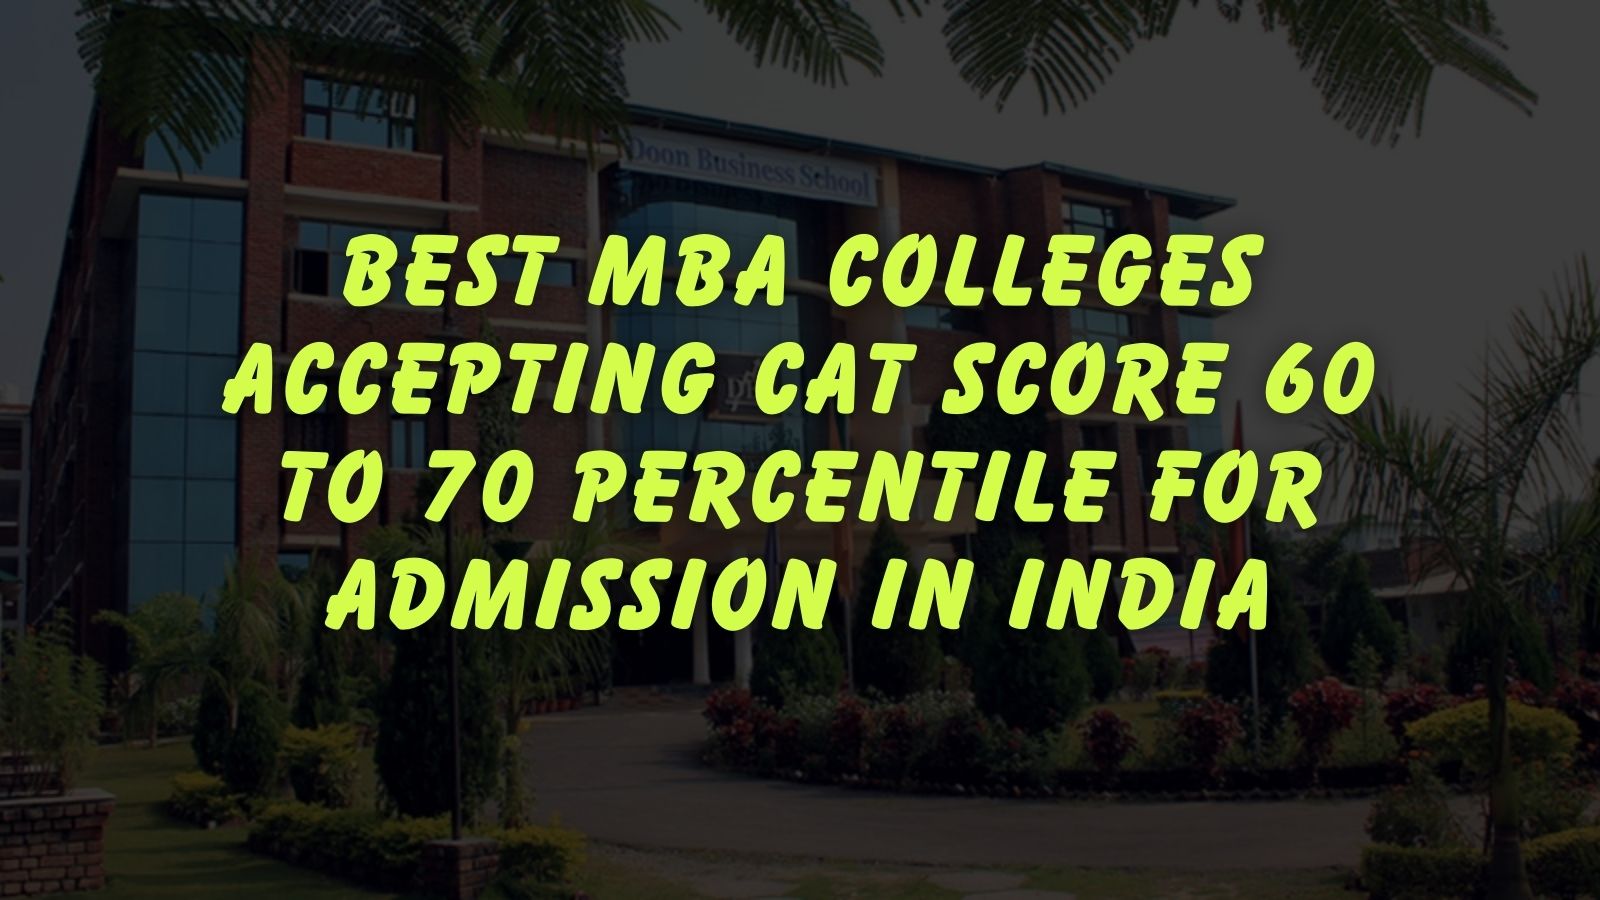 Best MBA Colleges Accepting CAT Score 60 to 70 Percentile for Admission in India